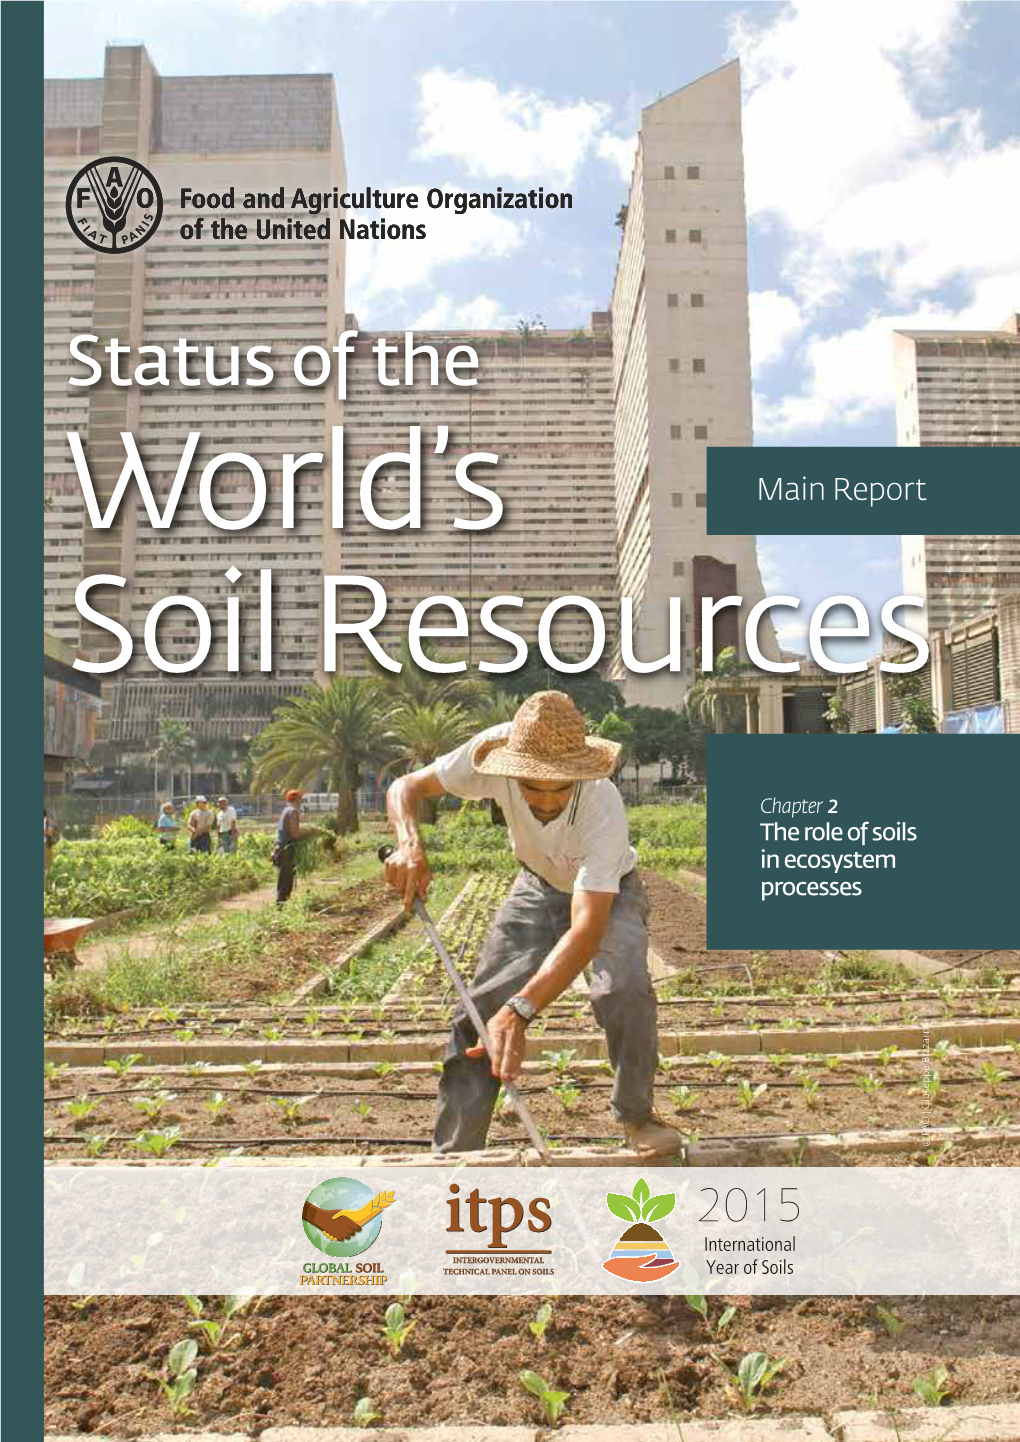 Chapter 2, the Role of Soils in Ecosystem Processes